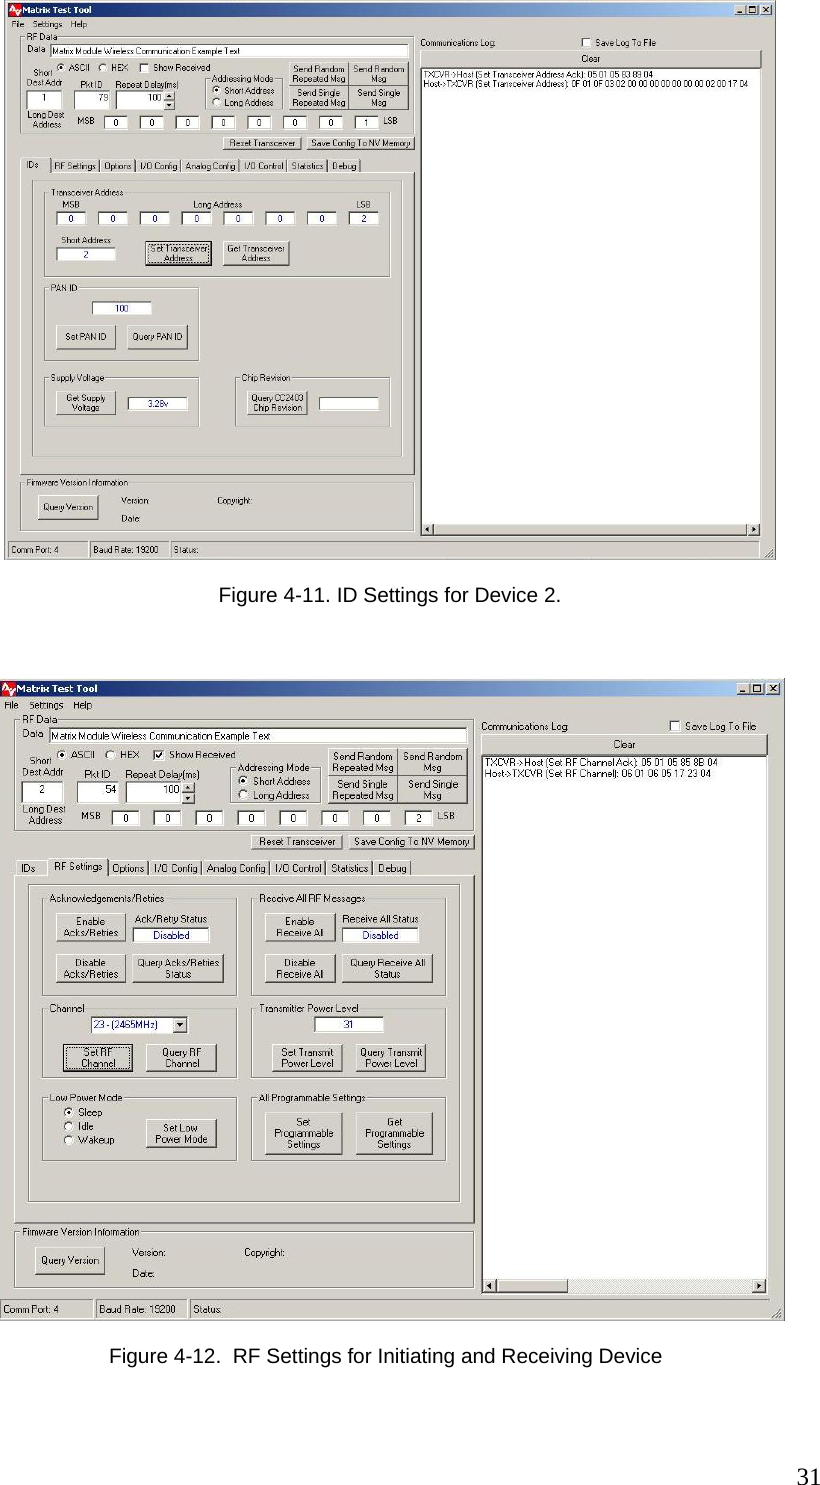  31  Figure 4-11. ID Settings for Device 2.      Figure 4-12.  RF Settings for Initiating and Receiving Device  